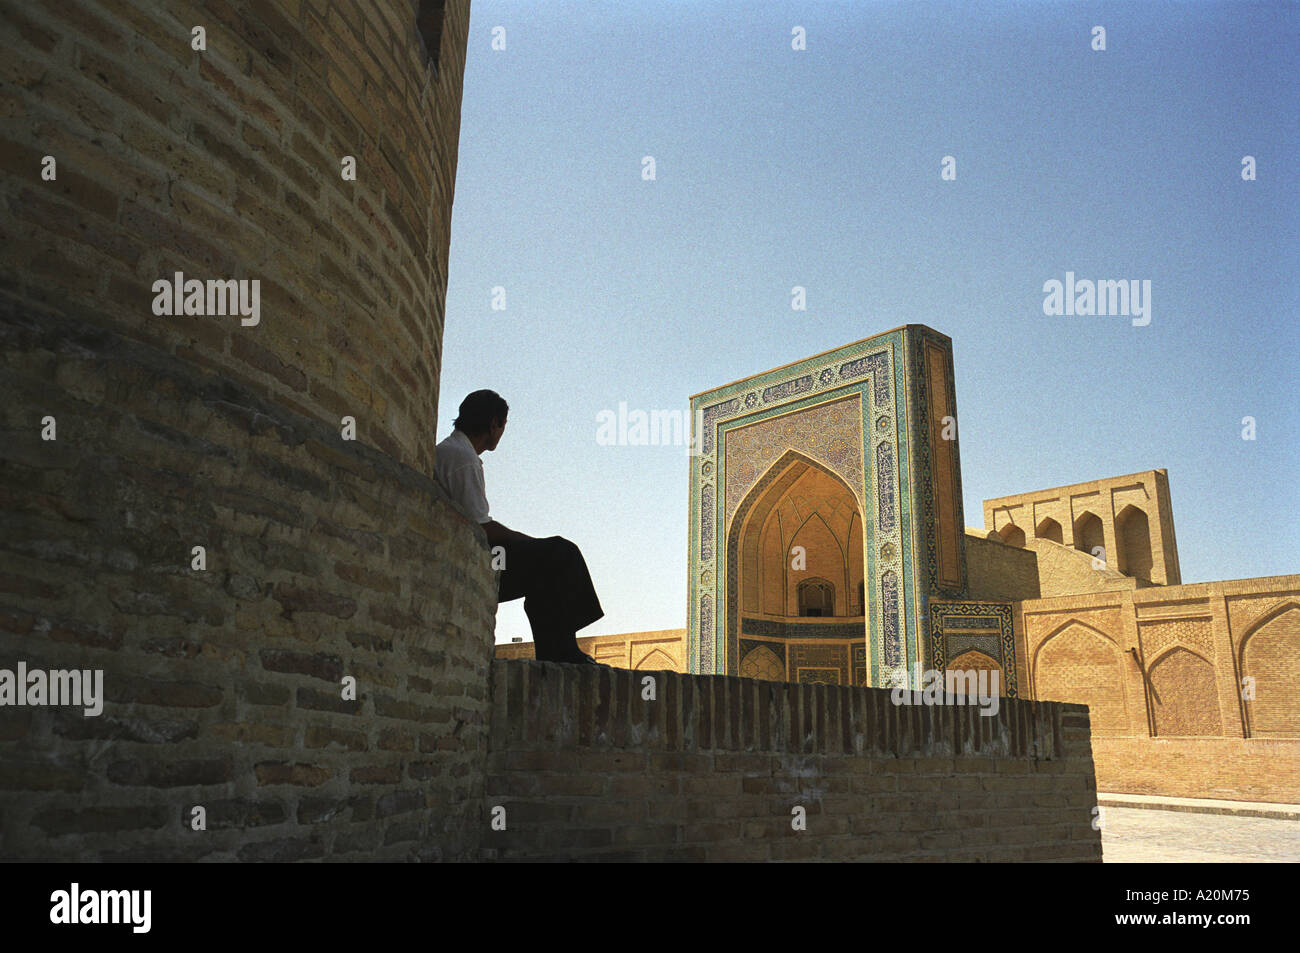 Sellers of carpets and tourist souvenirs sit in the shade outside the Kalan Mosque and Medressa, Bukhara, Uzbekistan Stock Photo